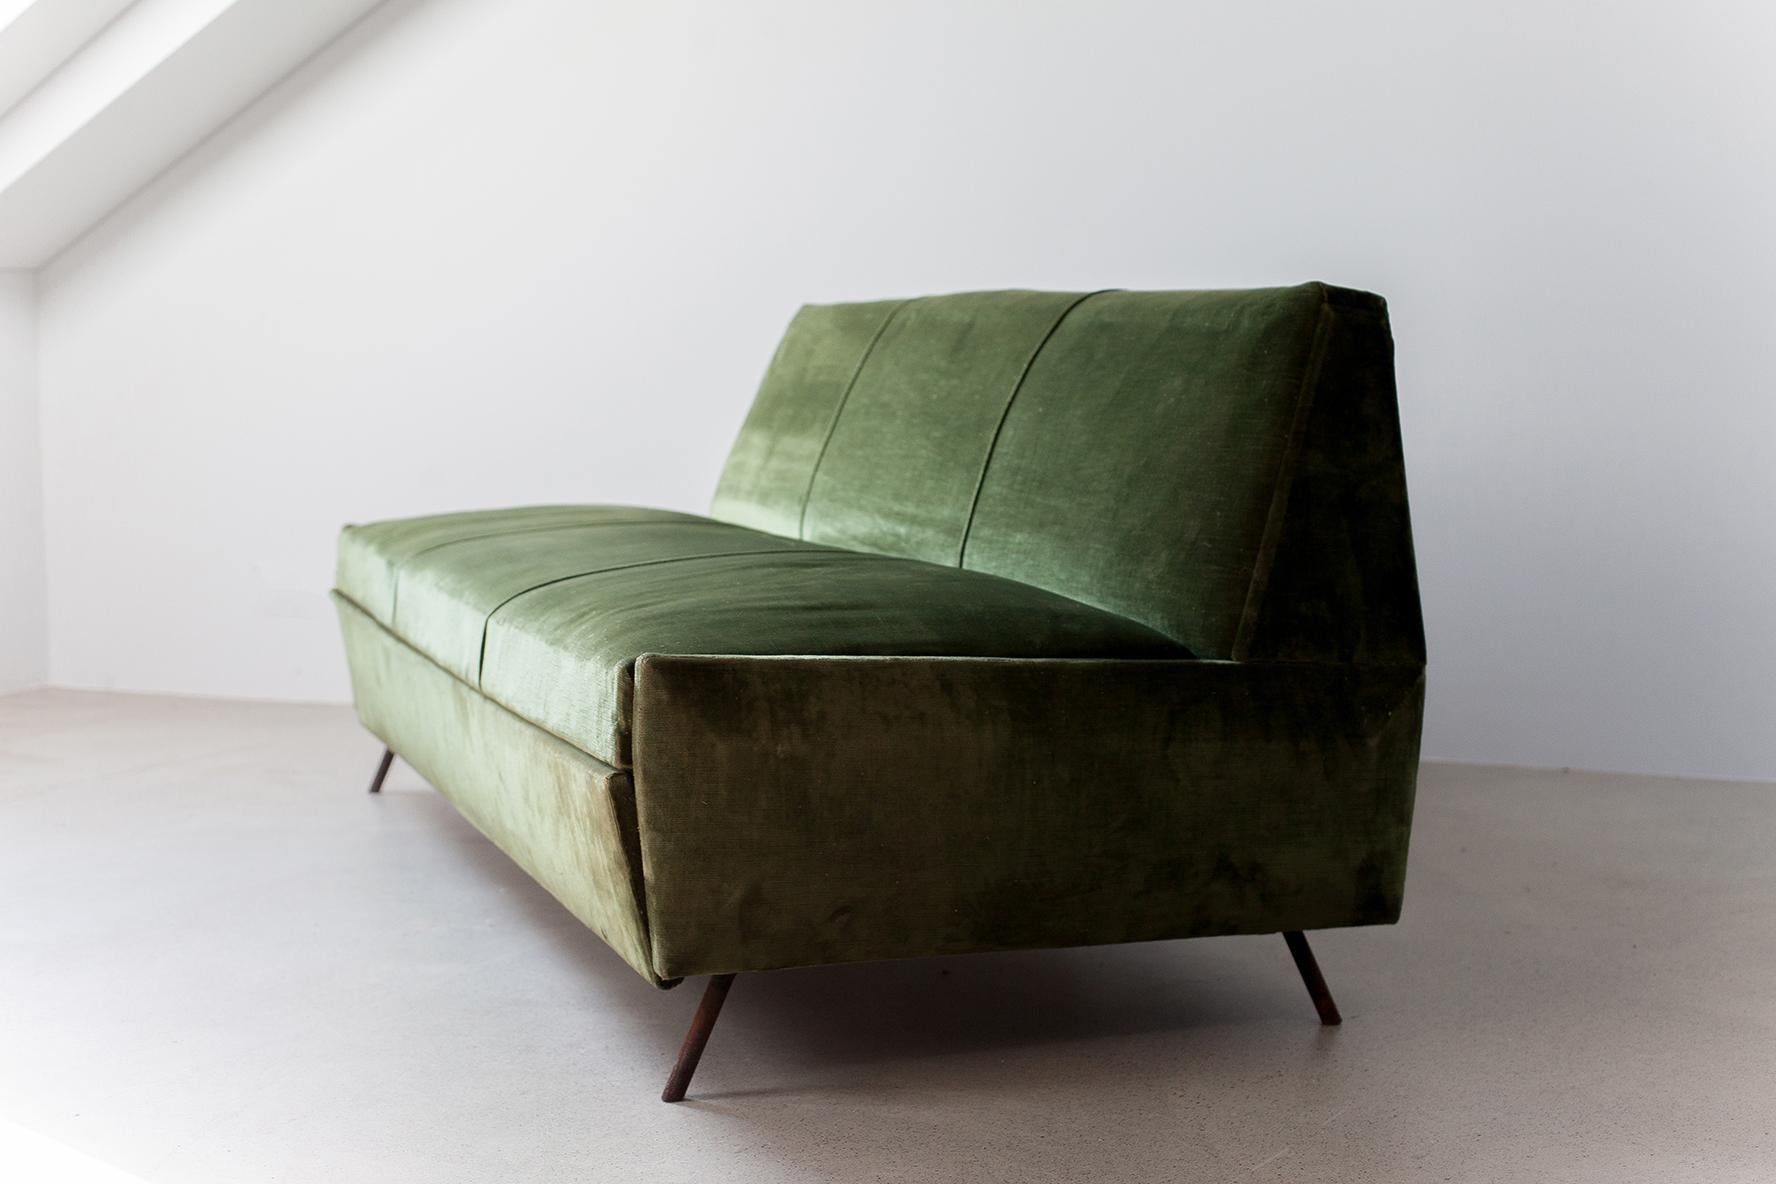 Beautiful stylish vintage sofa bed / daybed designed by Marco Zanuso for Arflex Italy in the 1950s. Model Sleep-O-Matic version with 2 legs instead of 3. The sofa is upholstered in vintage green velvet. You may consider to reupholster it due its age.